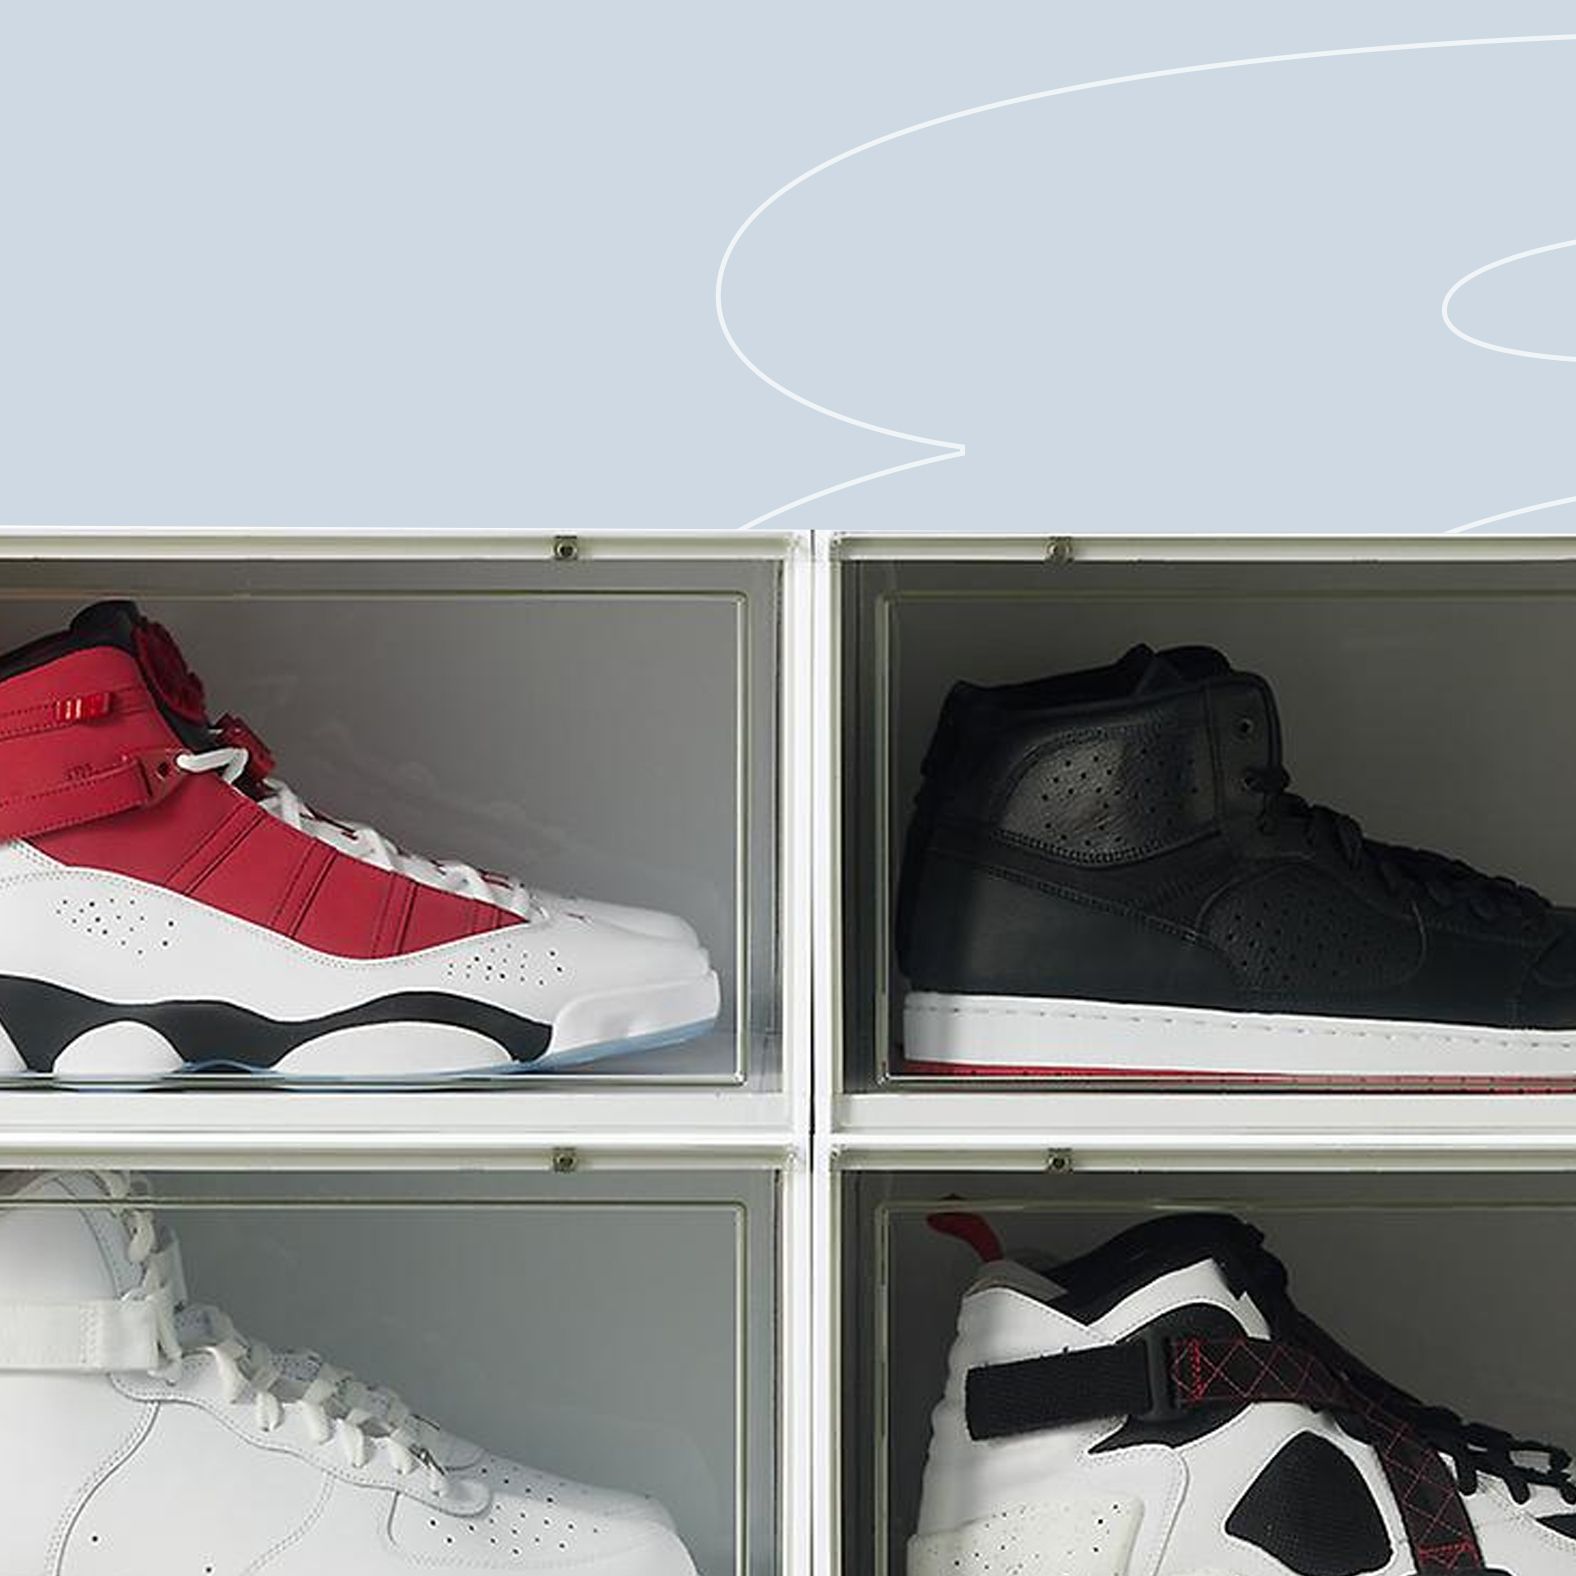 The 16 Best Shoe Organizers For Storing and Displaying Your Kicks